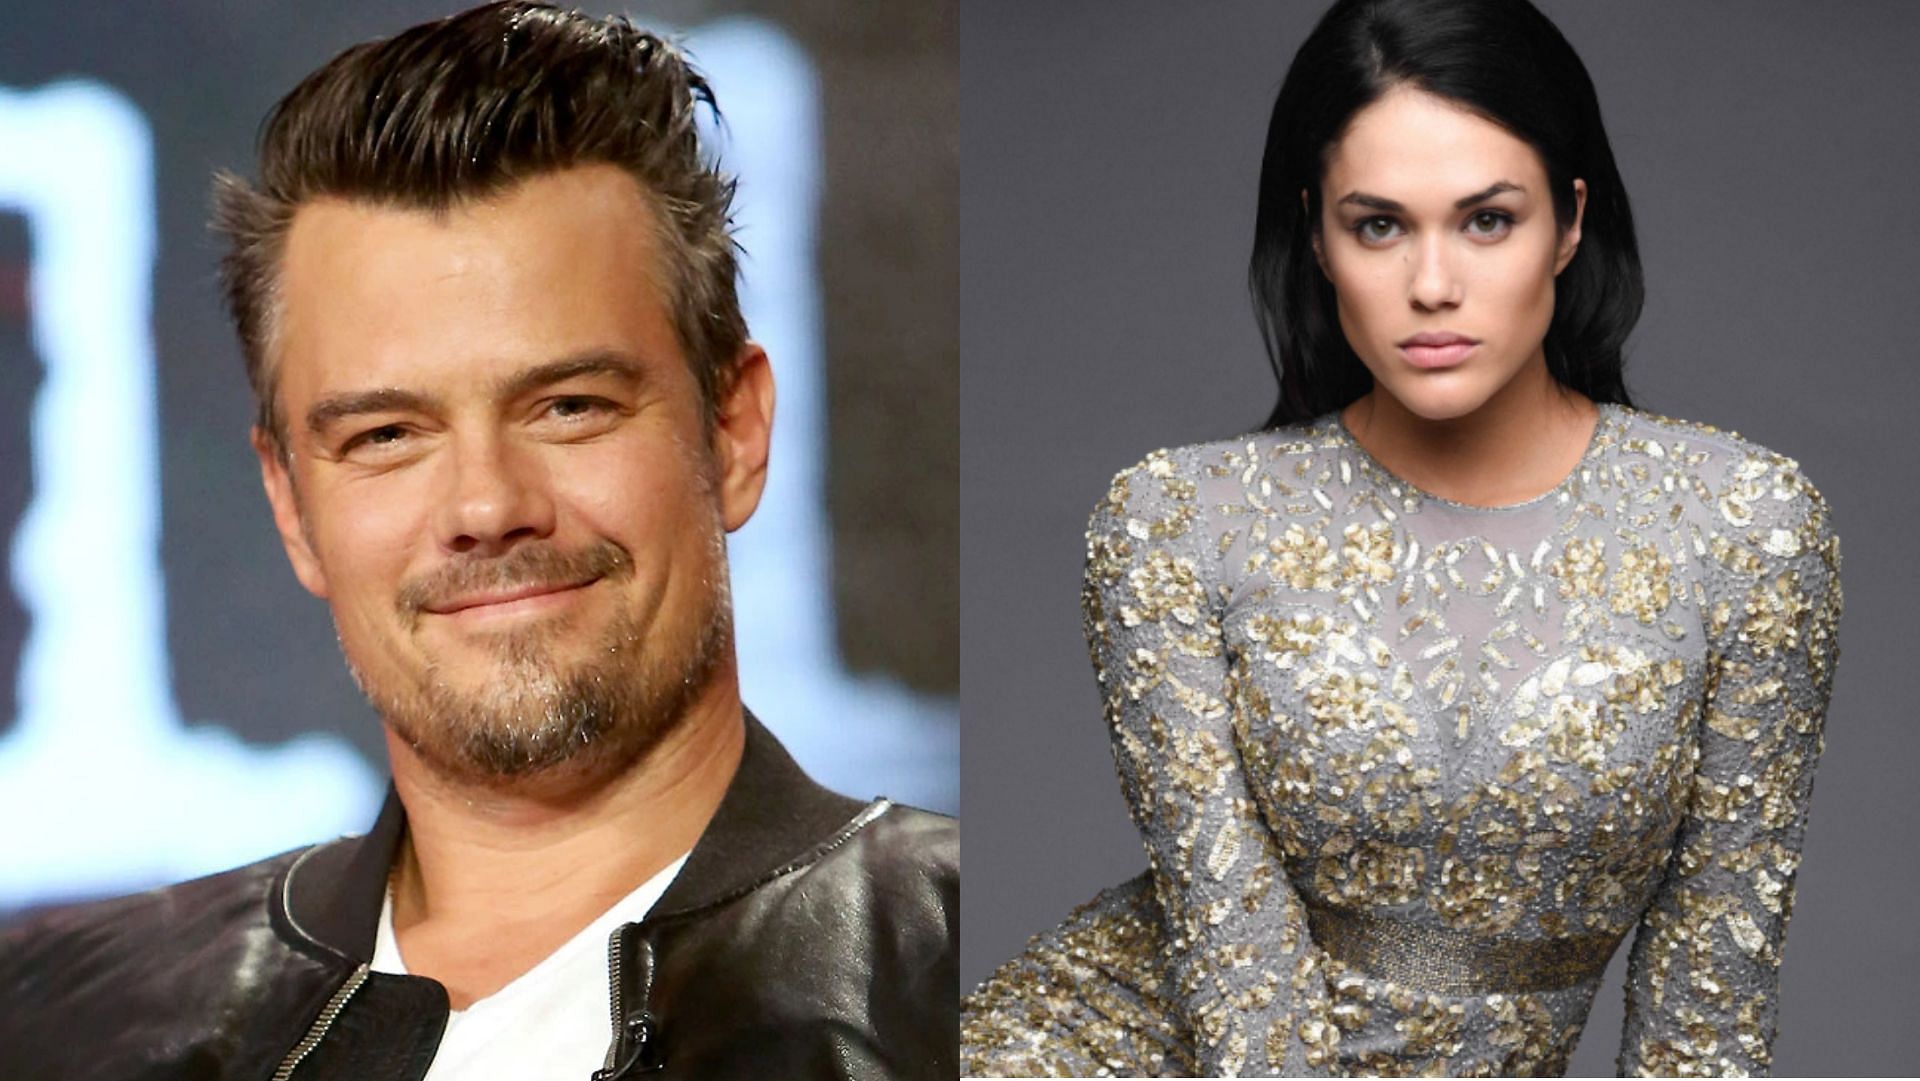 Josh Duhamel and Audra Mari were first spotted together in 2019. (Image via Rachel Murray/Getty, audramari/Instagram)